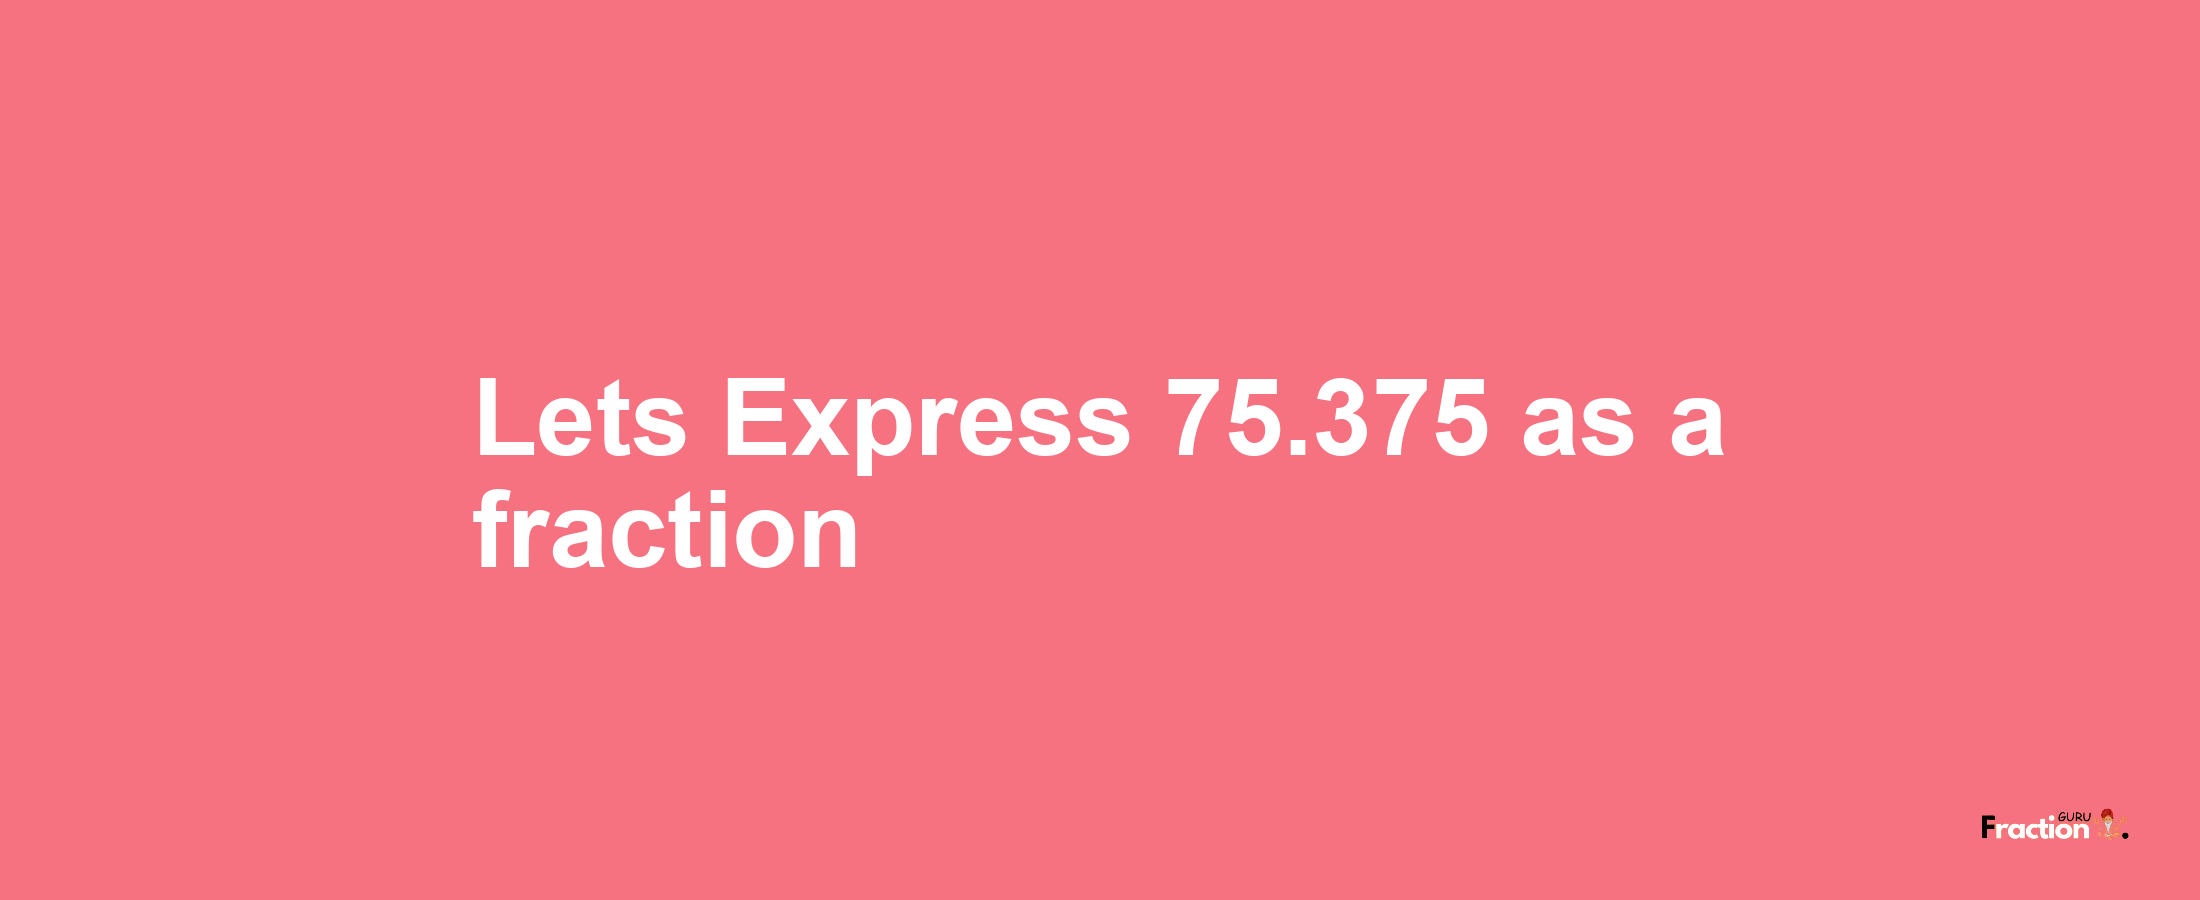 Lets Express 75.375 as afraction